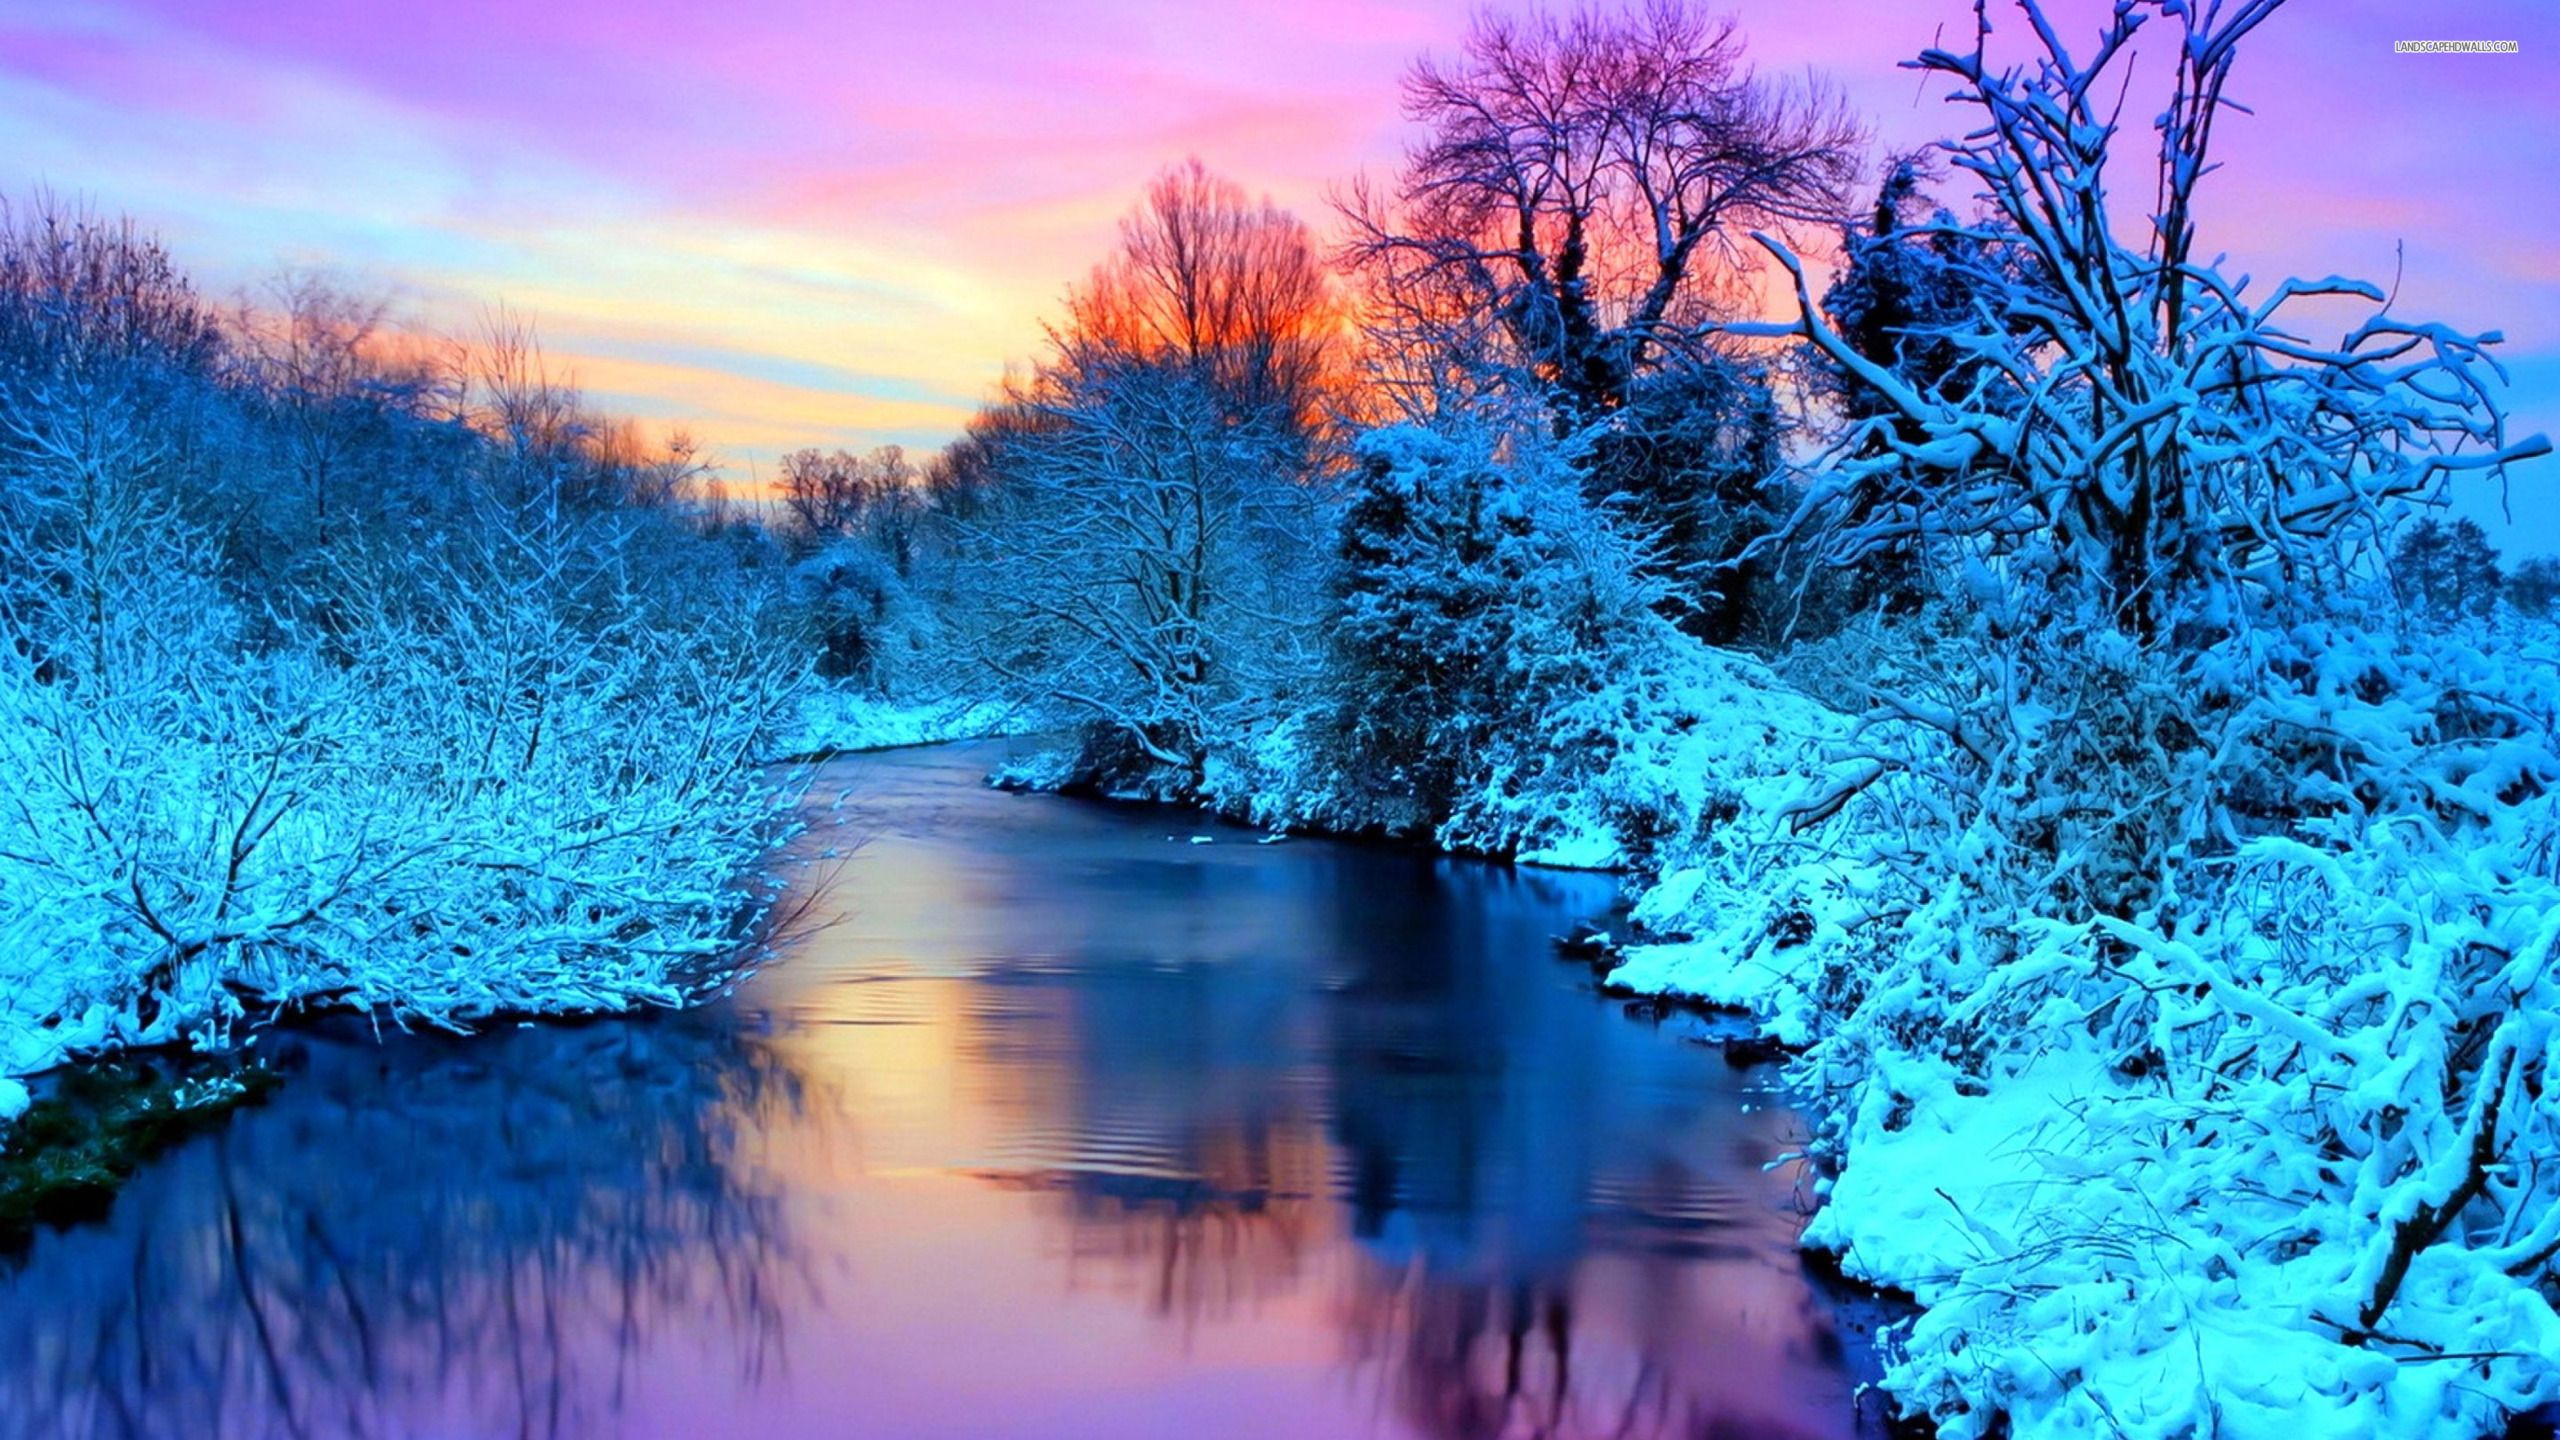 Scenic Winter Background HD Wallpapers 5820 - Amazing Wallpaperz